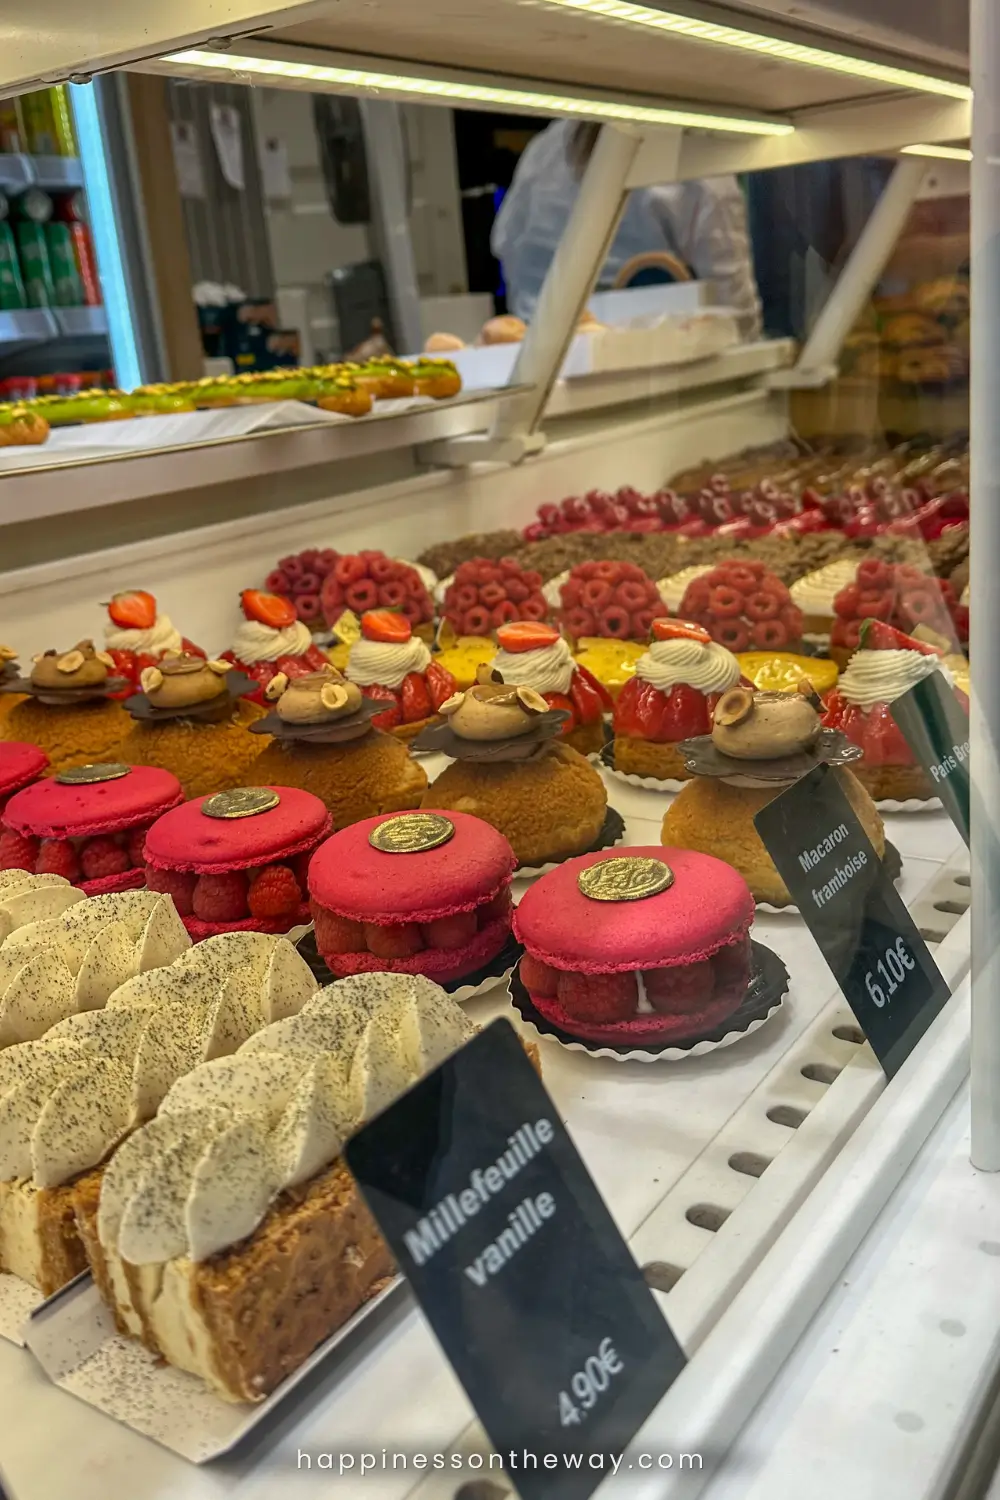 n enticing display of French pastries at a Parisian patisserie, featuring colorful macarons, fruit-topped tarts, and a classic millefeuille vanille. Price tags in the foreground suggest a customer's viewpoint, with the reflection of the bakery interior visible in the glass.